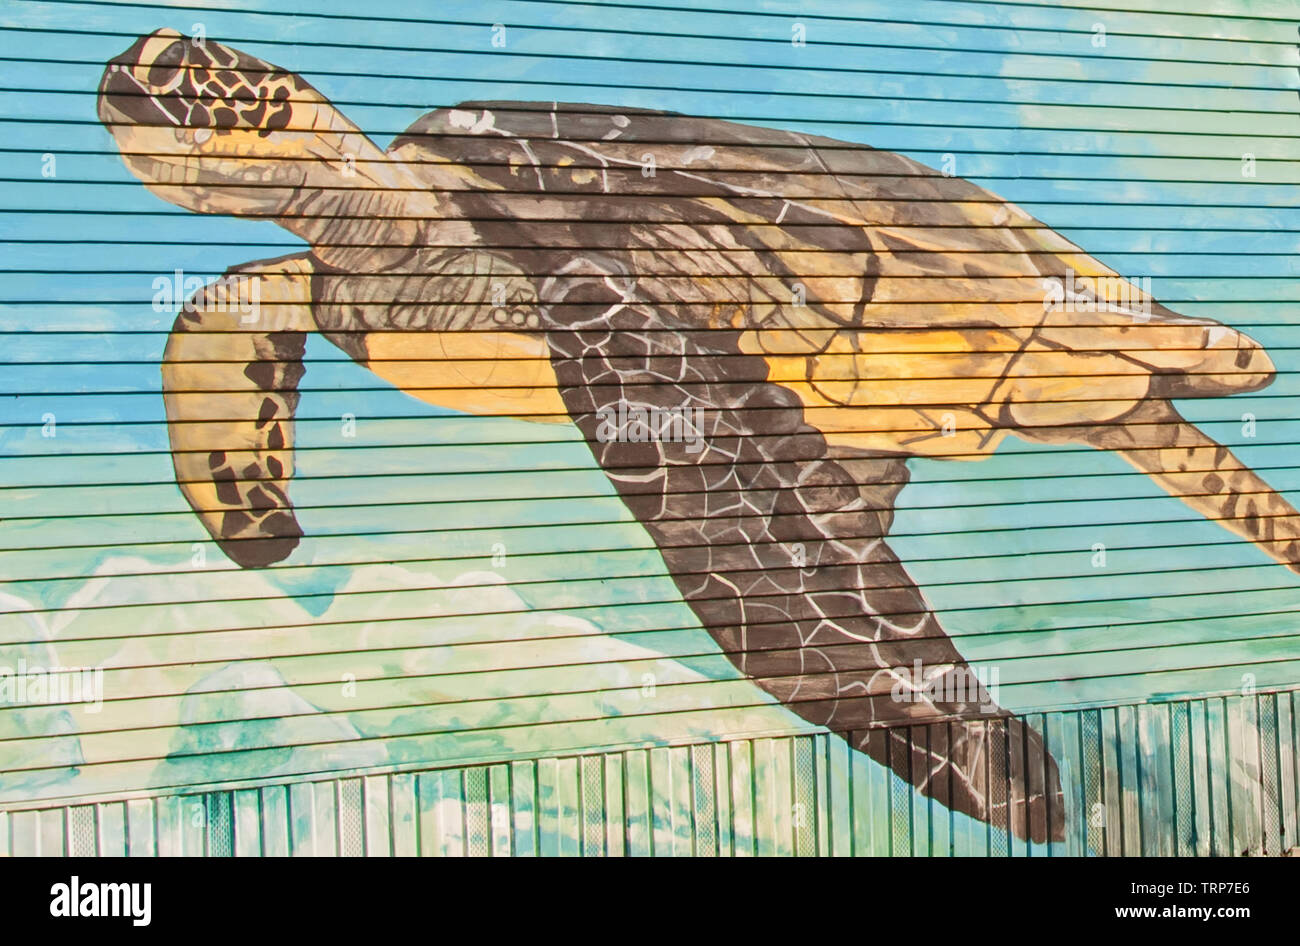 Photograph of a sea turtle artistically painted on the side of a wooden building Stock Photo